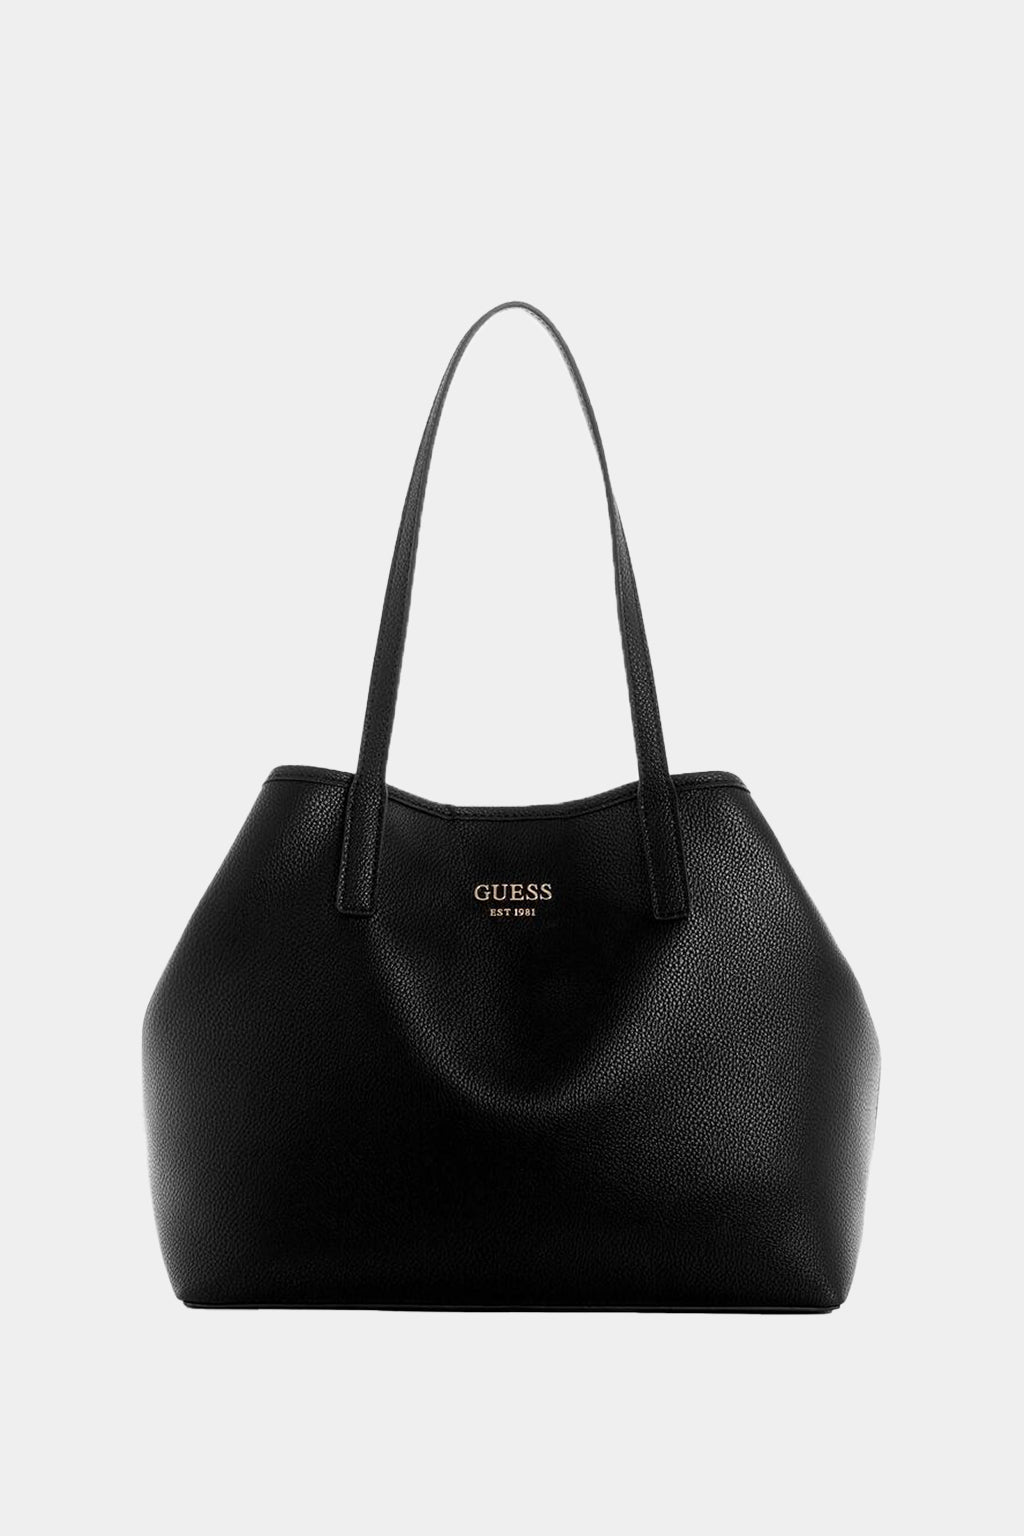 Guess - Vikky Tote